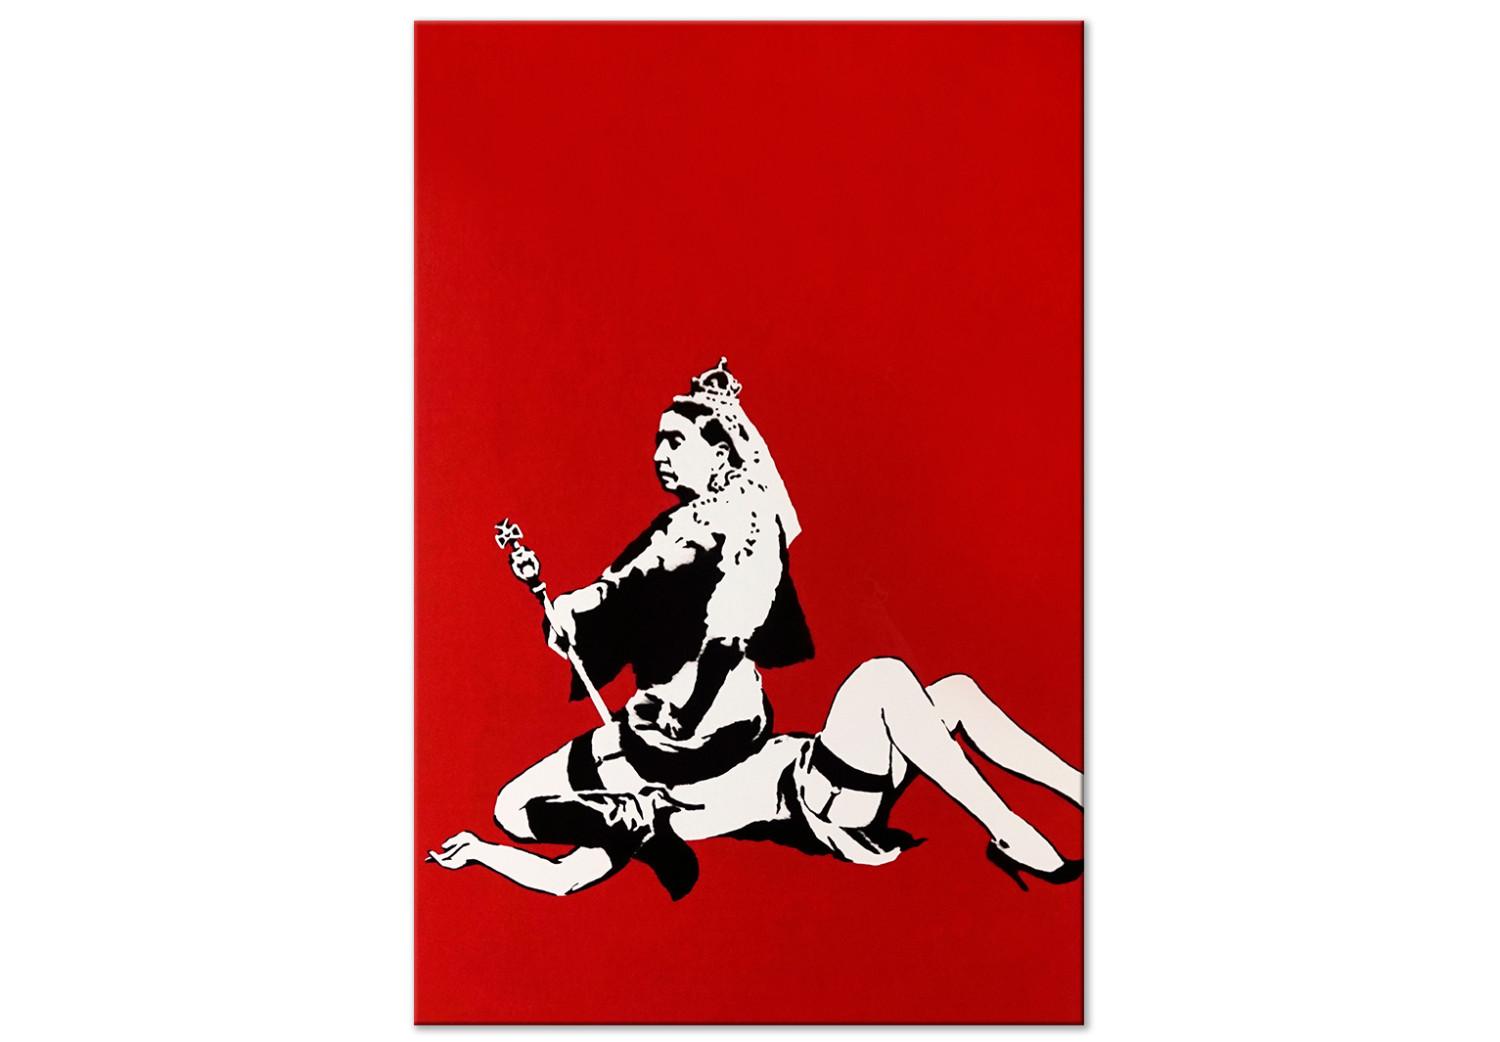 Canvas Banksy's Queen - street art style graphic on red background